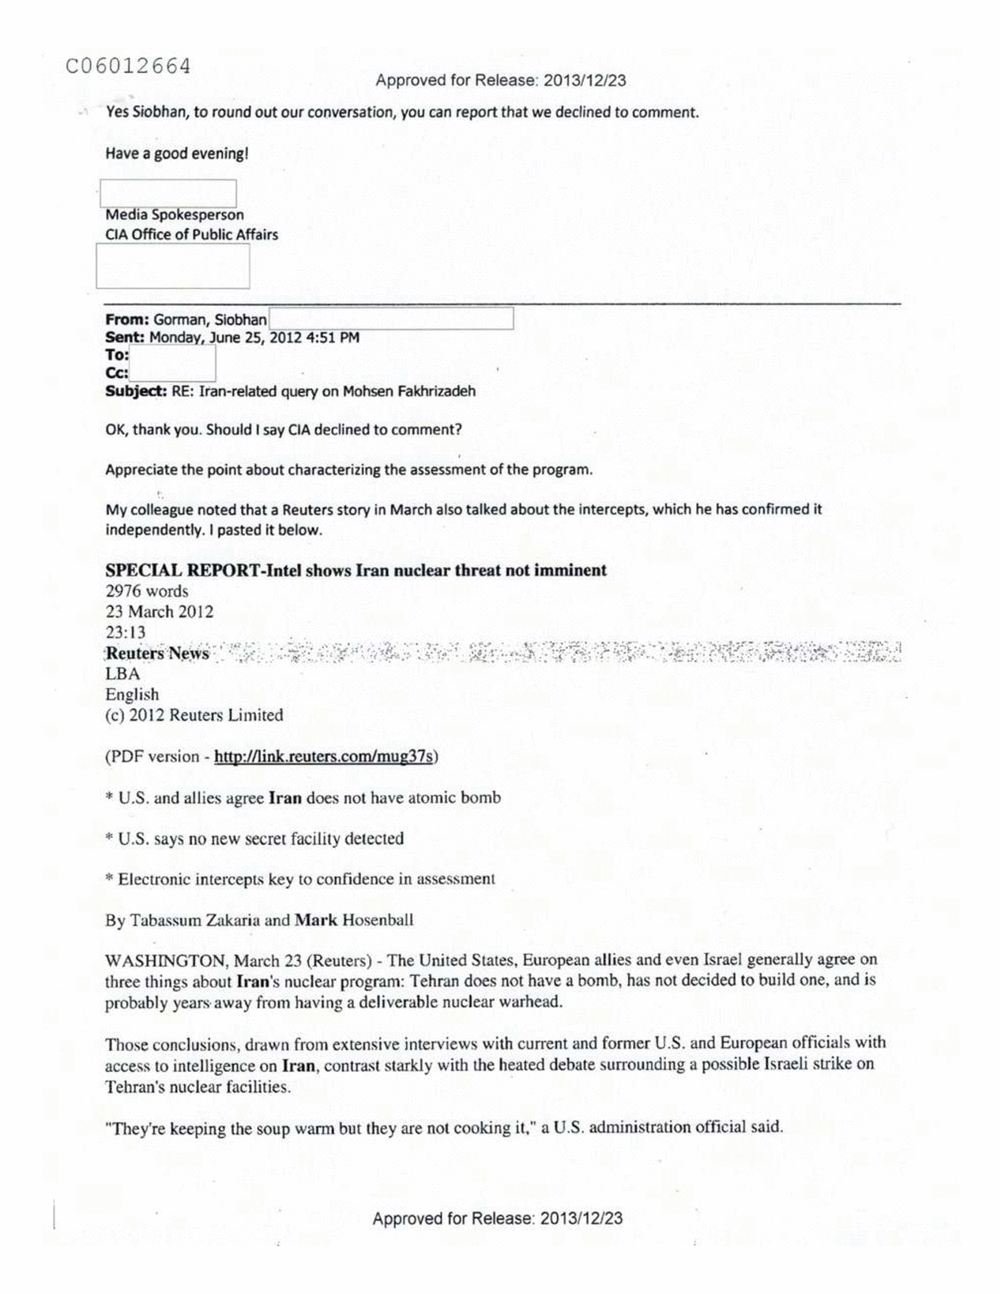 Page 243 from Email Correspondence Between Reporters and CIA Flacks